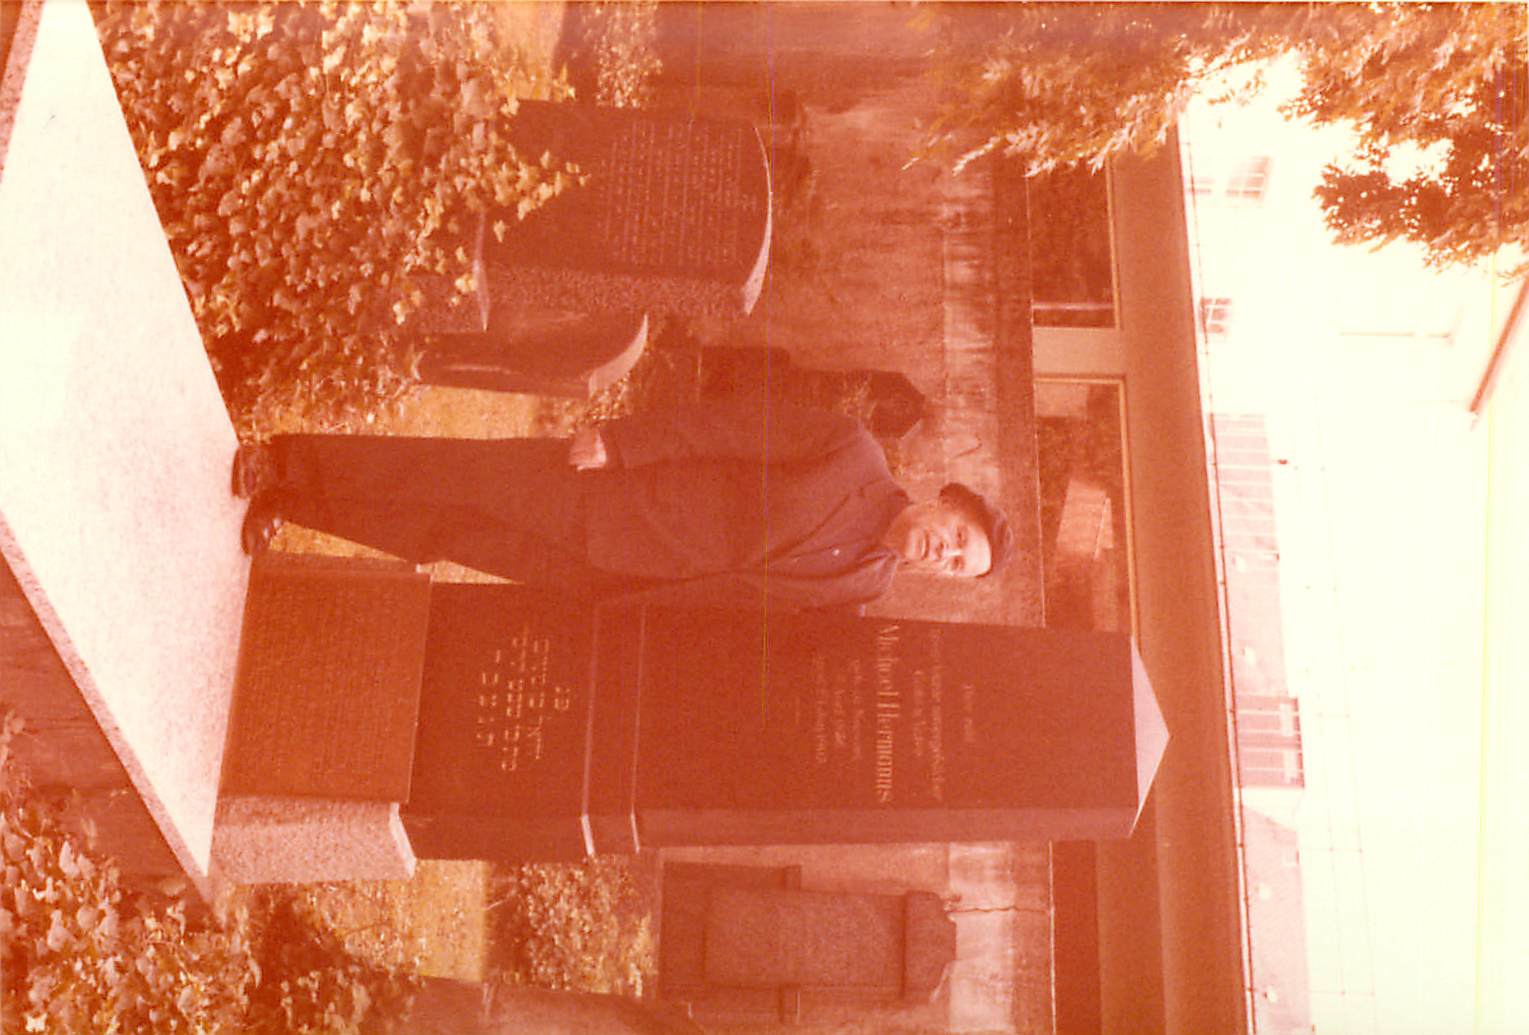 Grave of Michael Hermans with William Hermanns, Koblenz Jewish Cemetary, Sept. 1979